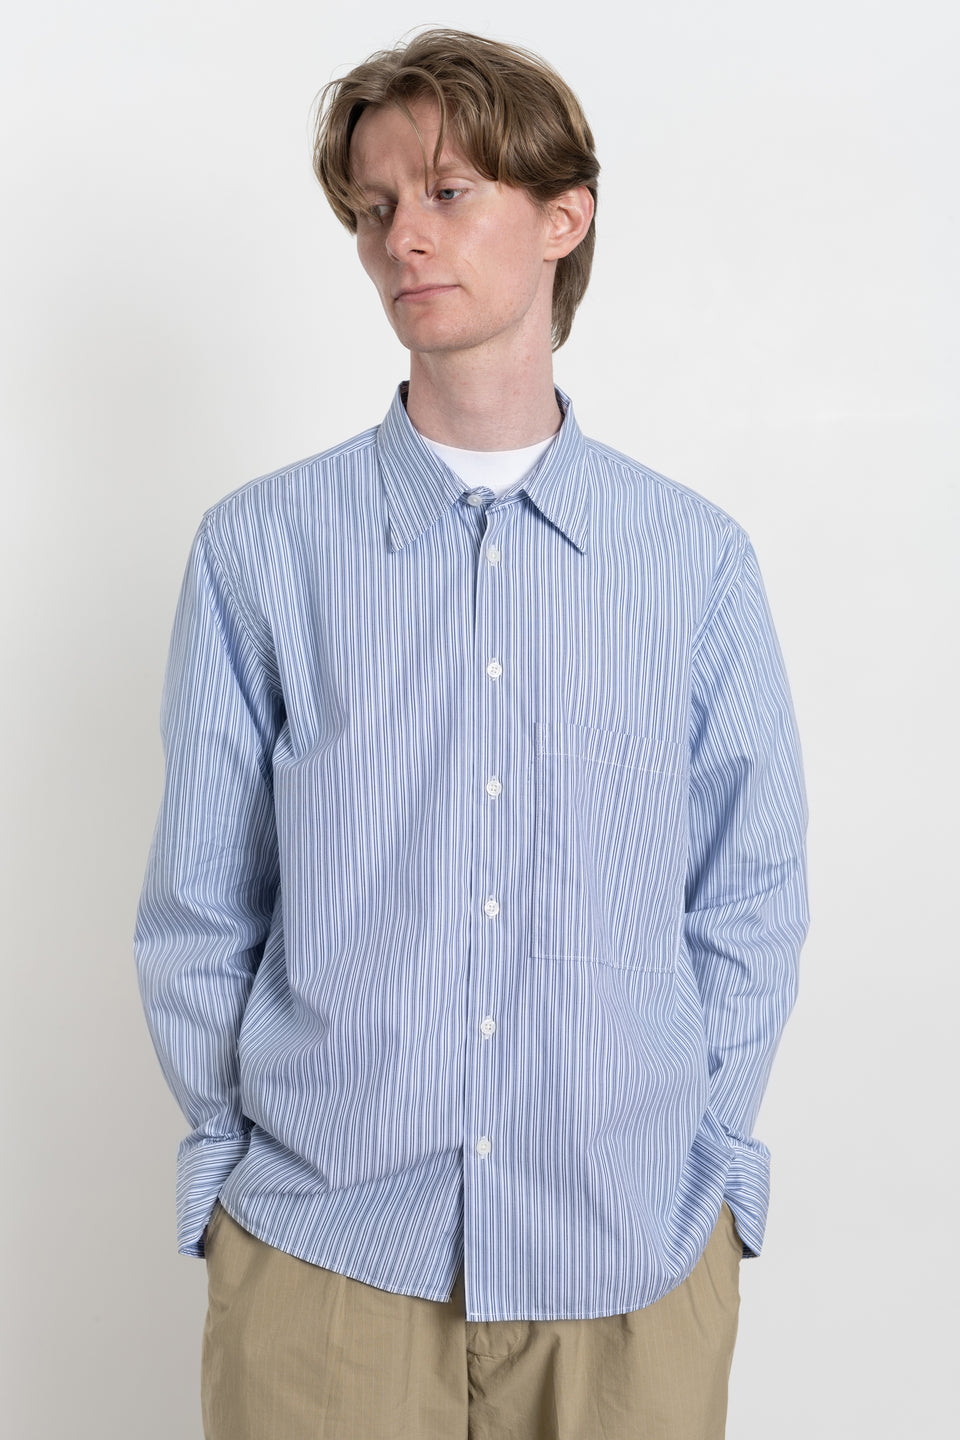 Universal Works SS24 Men's Collection Square Pocket Shirt Busy Stripe Cotton Blue / Navy Stripe Calculus Victoria BC Canada